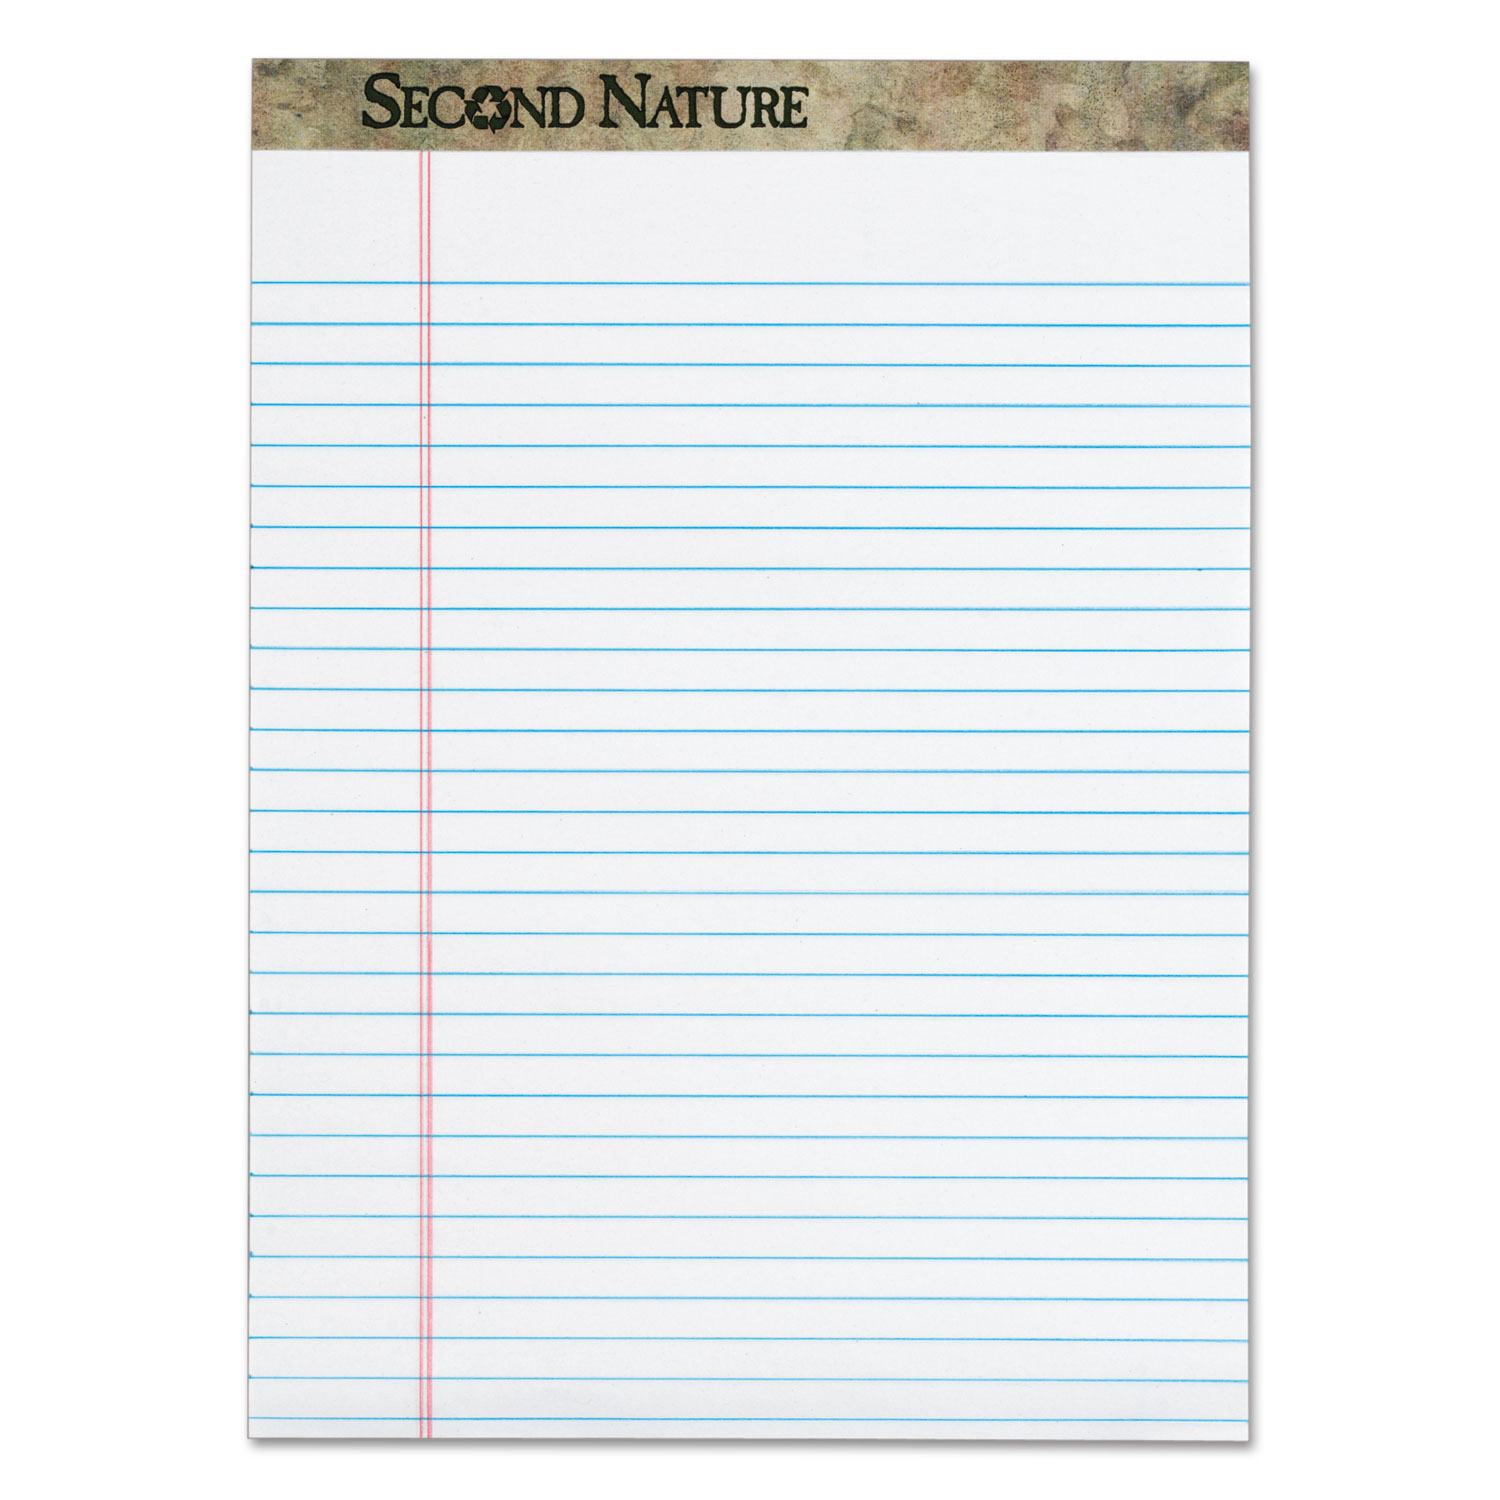  TOPS 74880 Second Nature Recycled Pads, Wide/Legal Rule, 8.5 x 11.75, White, 50 Sheets, Dozen (TOP74880) 